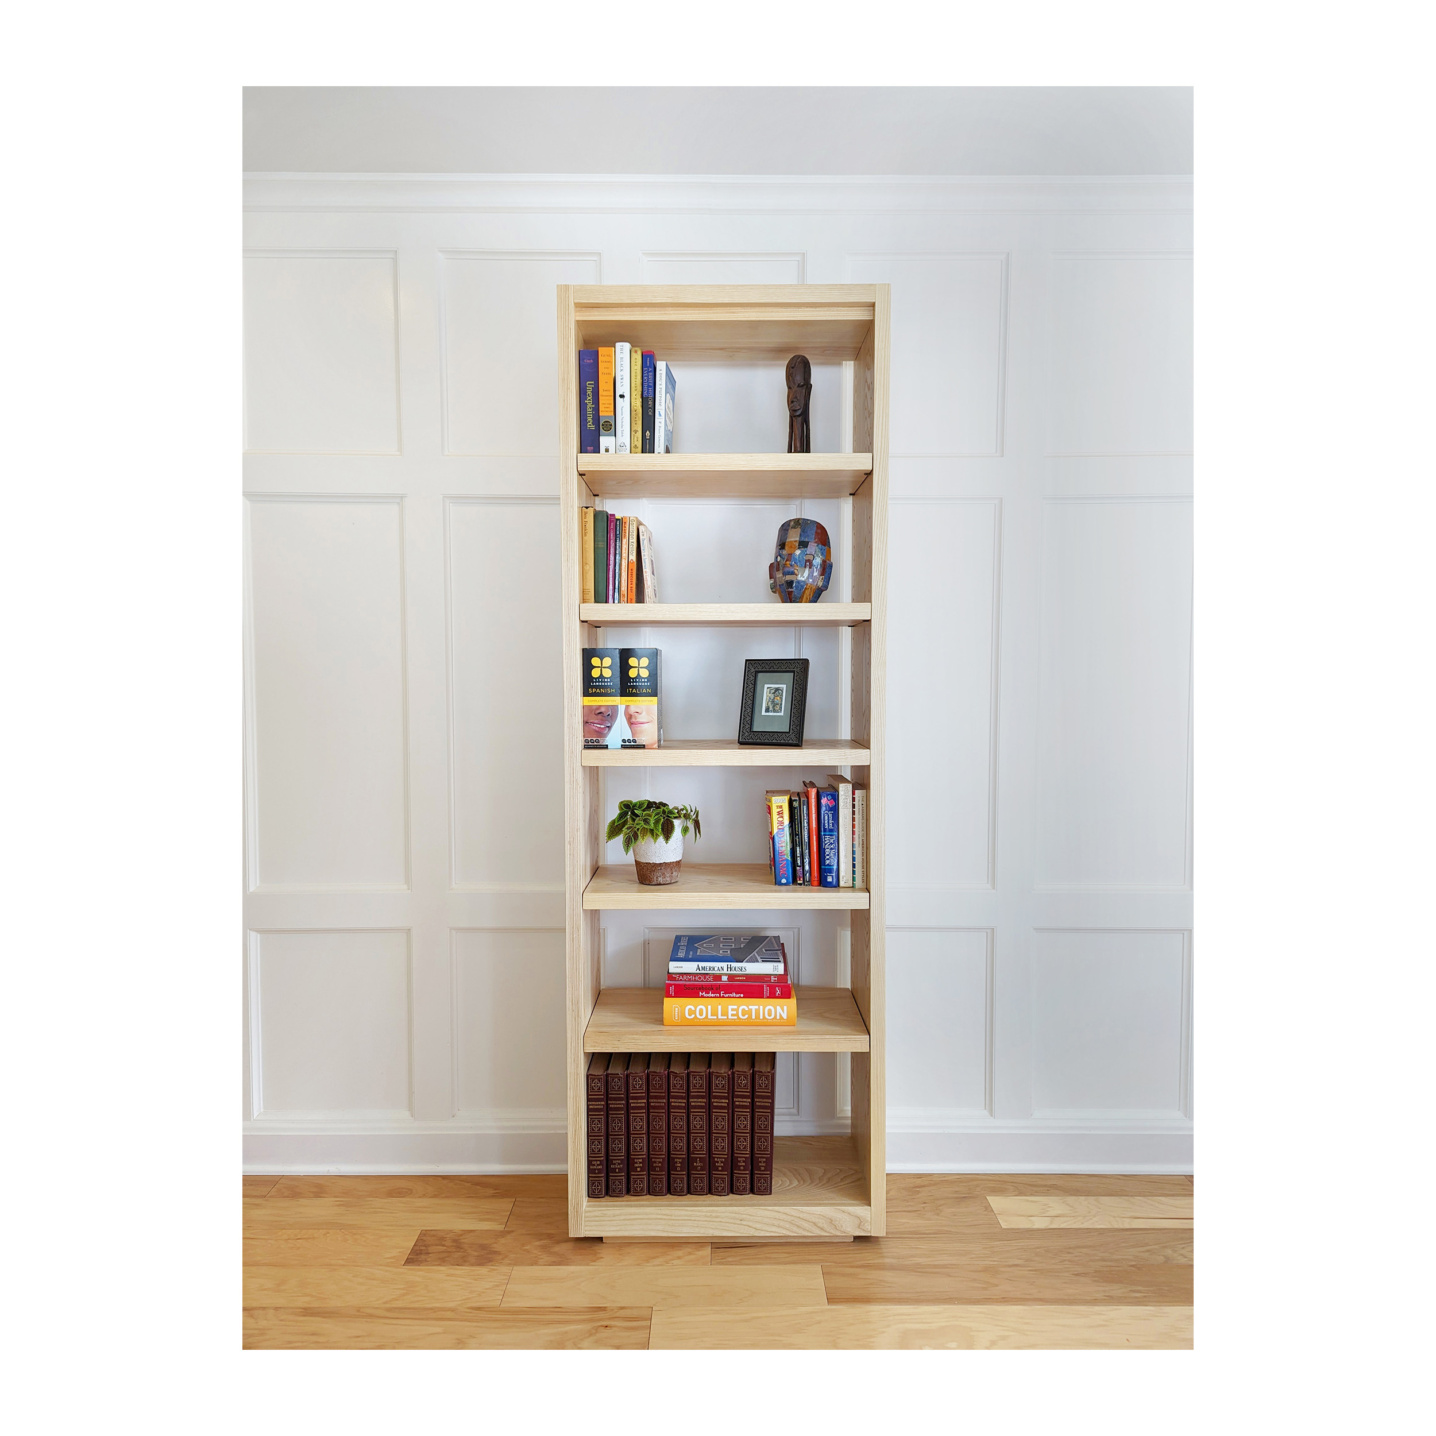 Modern Open back Bookshelf with adjustable shelve--The design and construction is done in Ohio